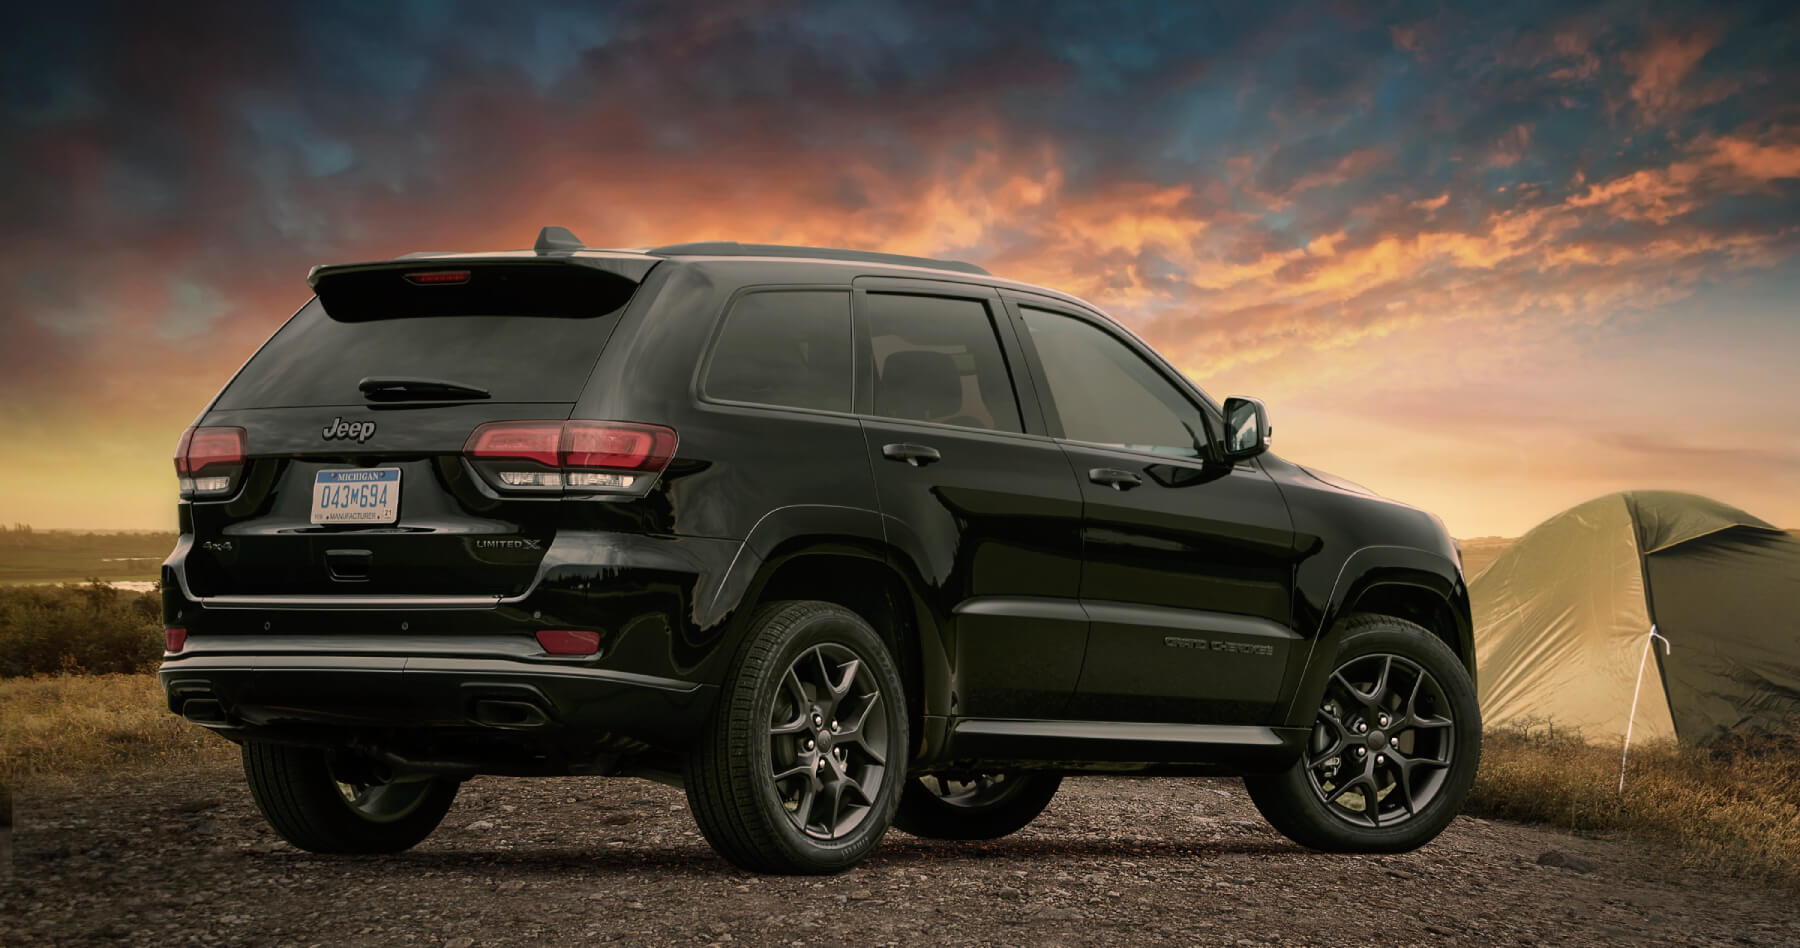 A black 2020 Jeep Grand Cherokee in front of a sunset with a tent in the background.